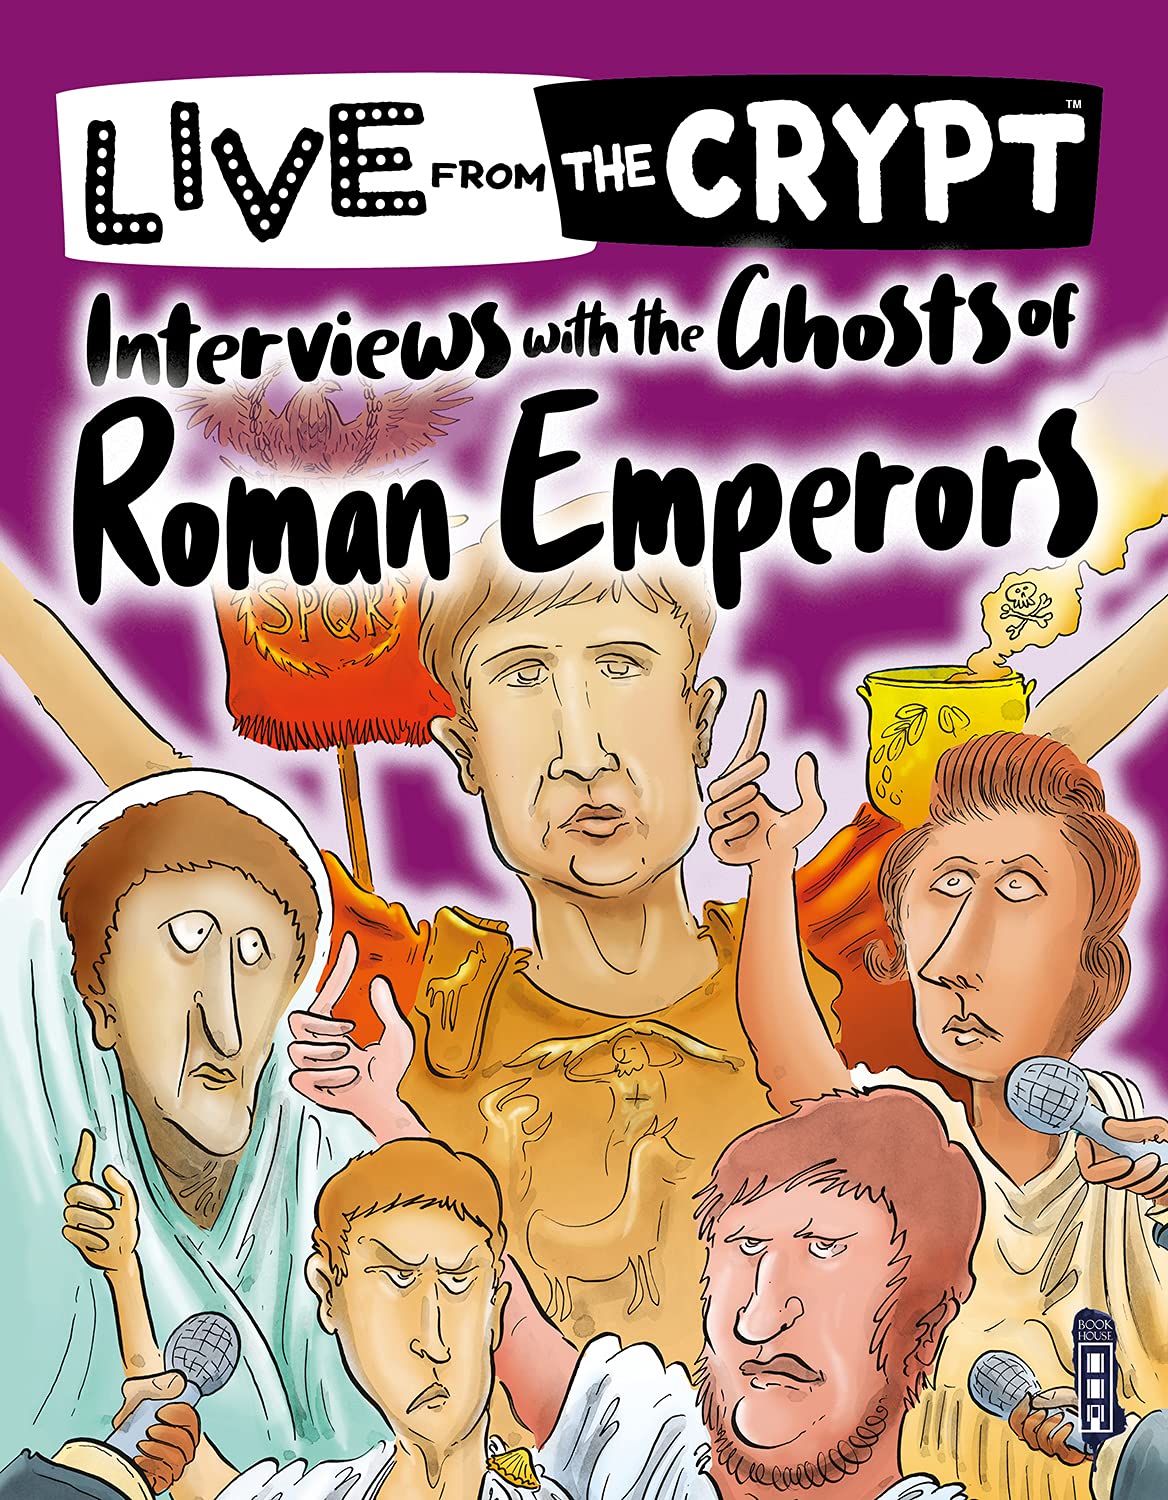 Live from the Crypt: Interviews with the Ghosts of Roman Emperors